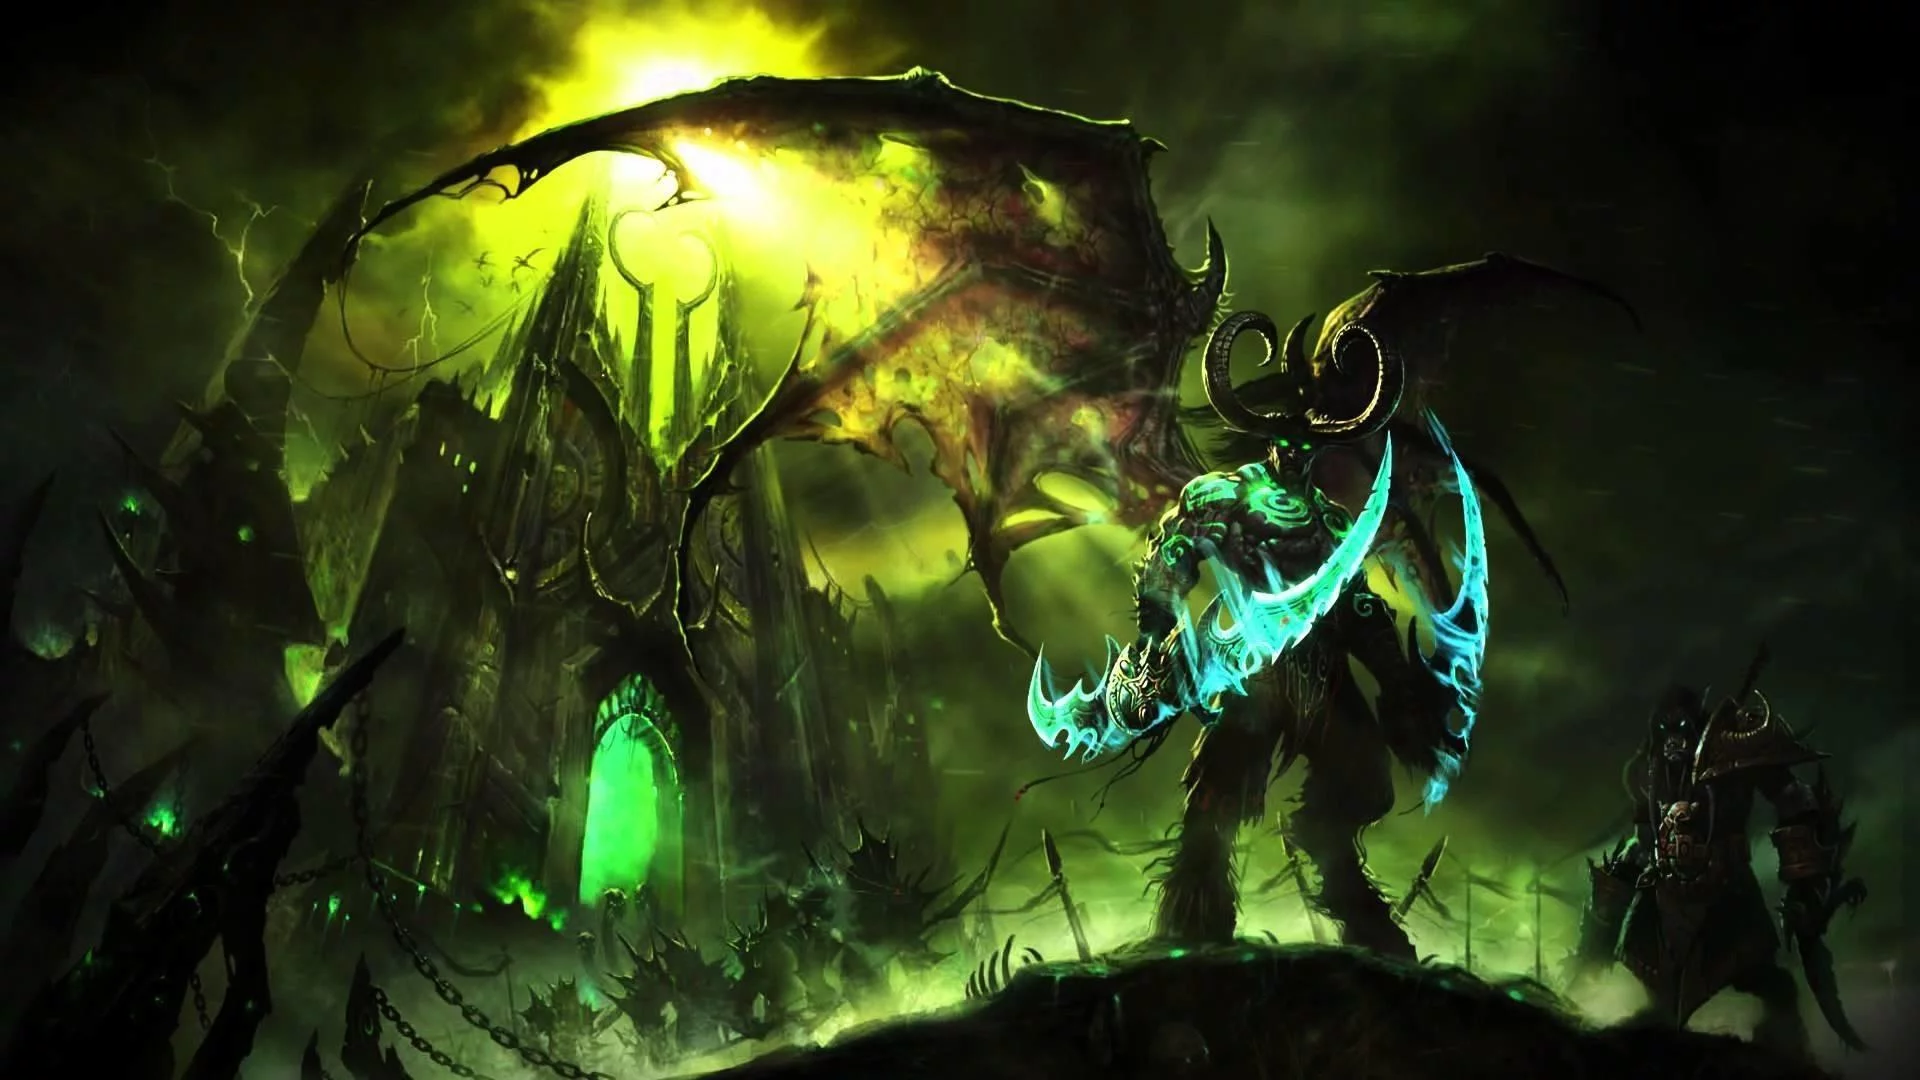 Free Download World Of Warcraft Wallpapers Naruto 1920x1080 Page 2110752 (1920 x 1080)